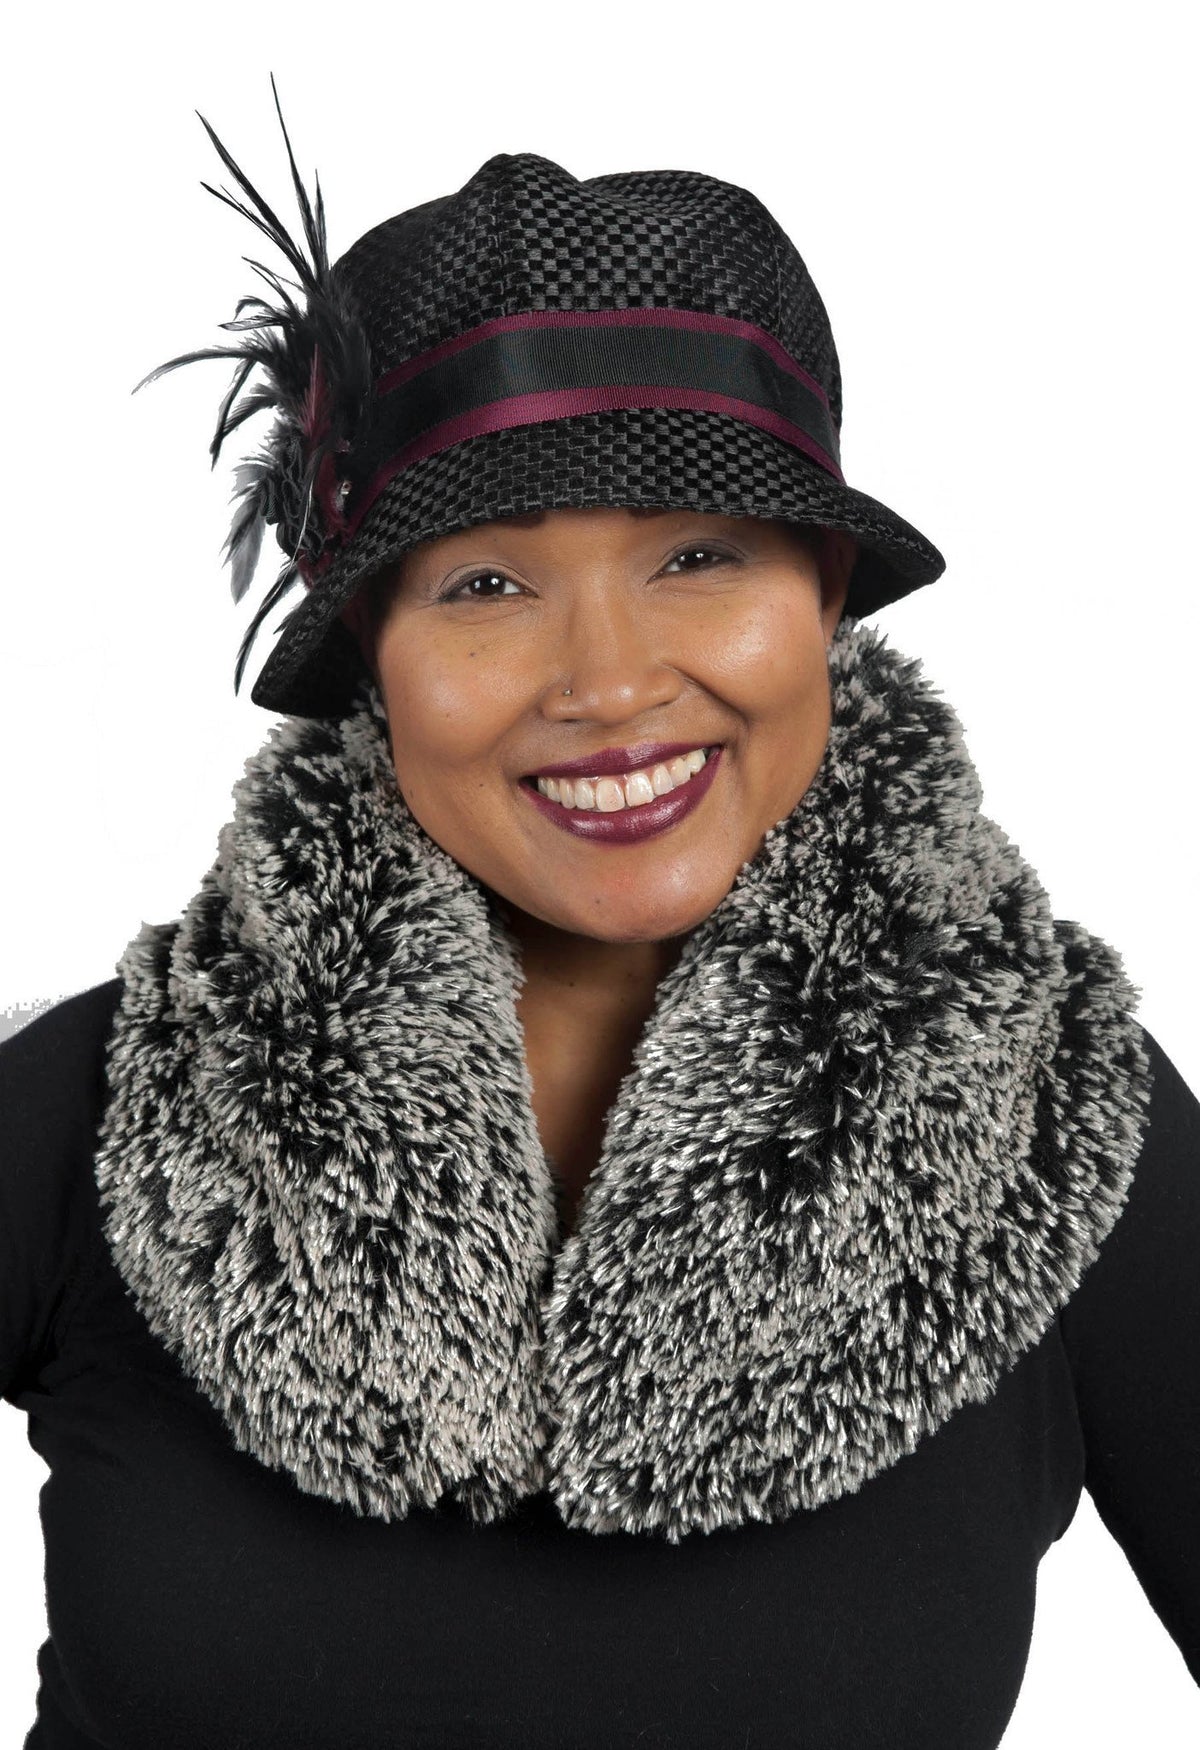 Model wearing Grace Cloche Interconnected in Black with Black and Burgundy Band Featuring Black Feather Brooch | Silver Tip Fox in Black Faux Fur Collar featured | Hand made By Pandemonium Millinery | Seattle WA USA